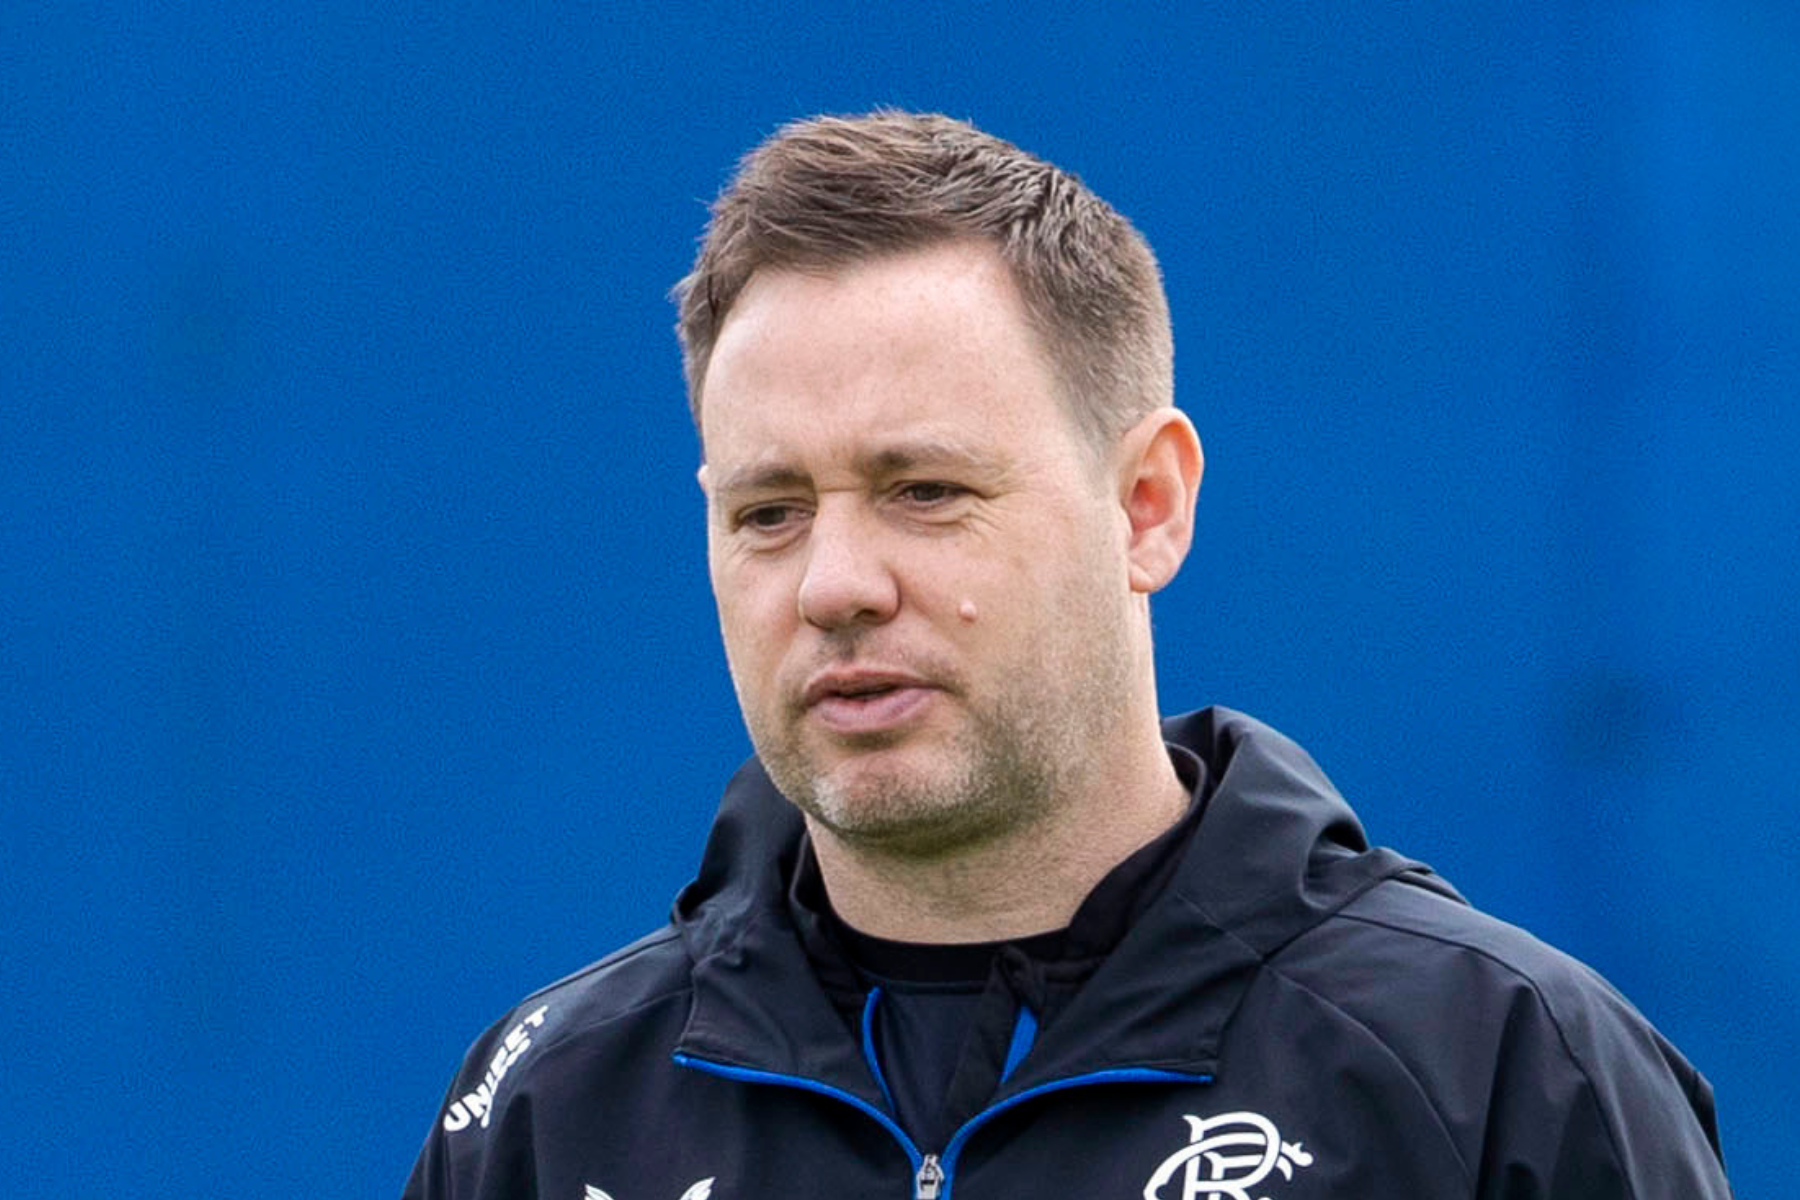 Michael Beale explains Rangers' injury woes and how to solve them